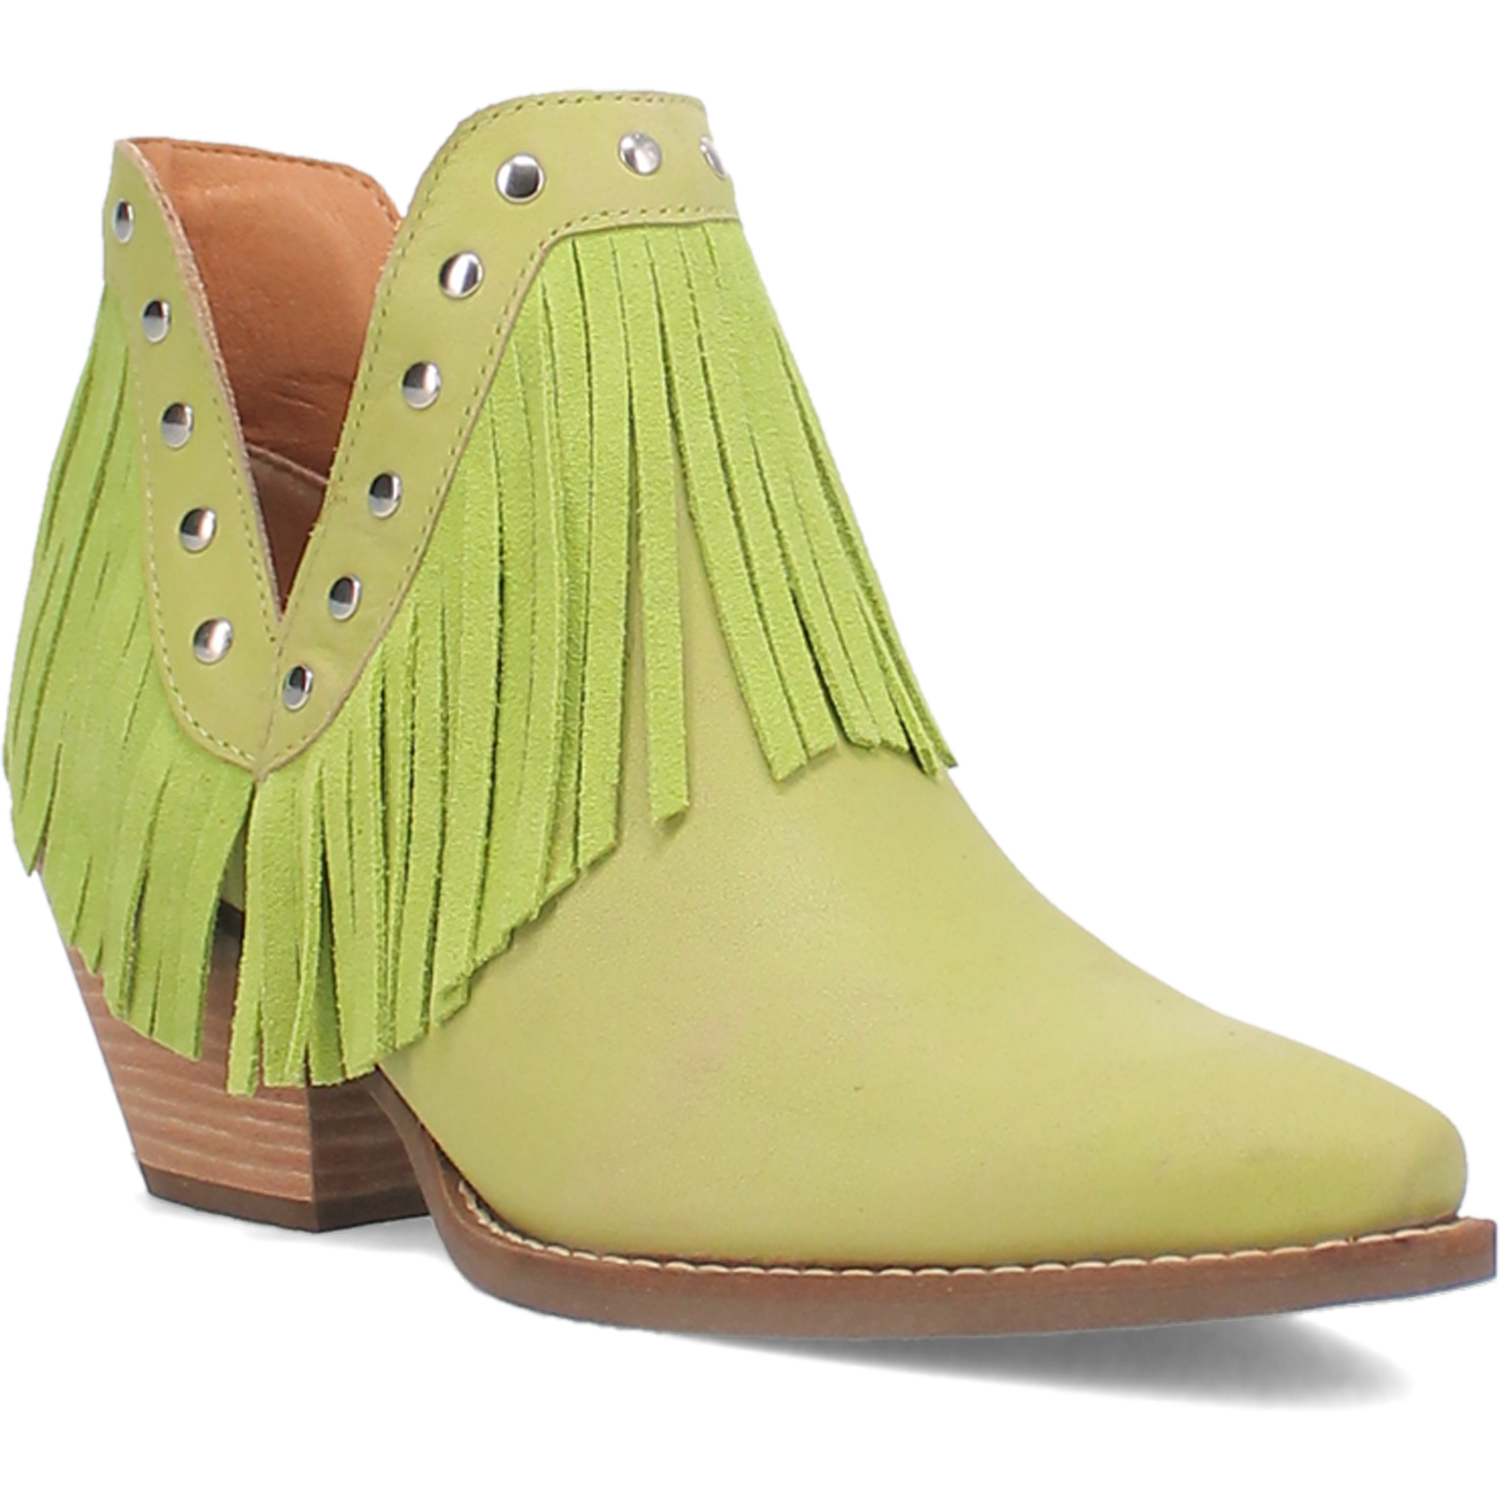 Fine N' Dandy Lime Leather Bootie (DS)